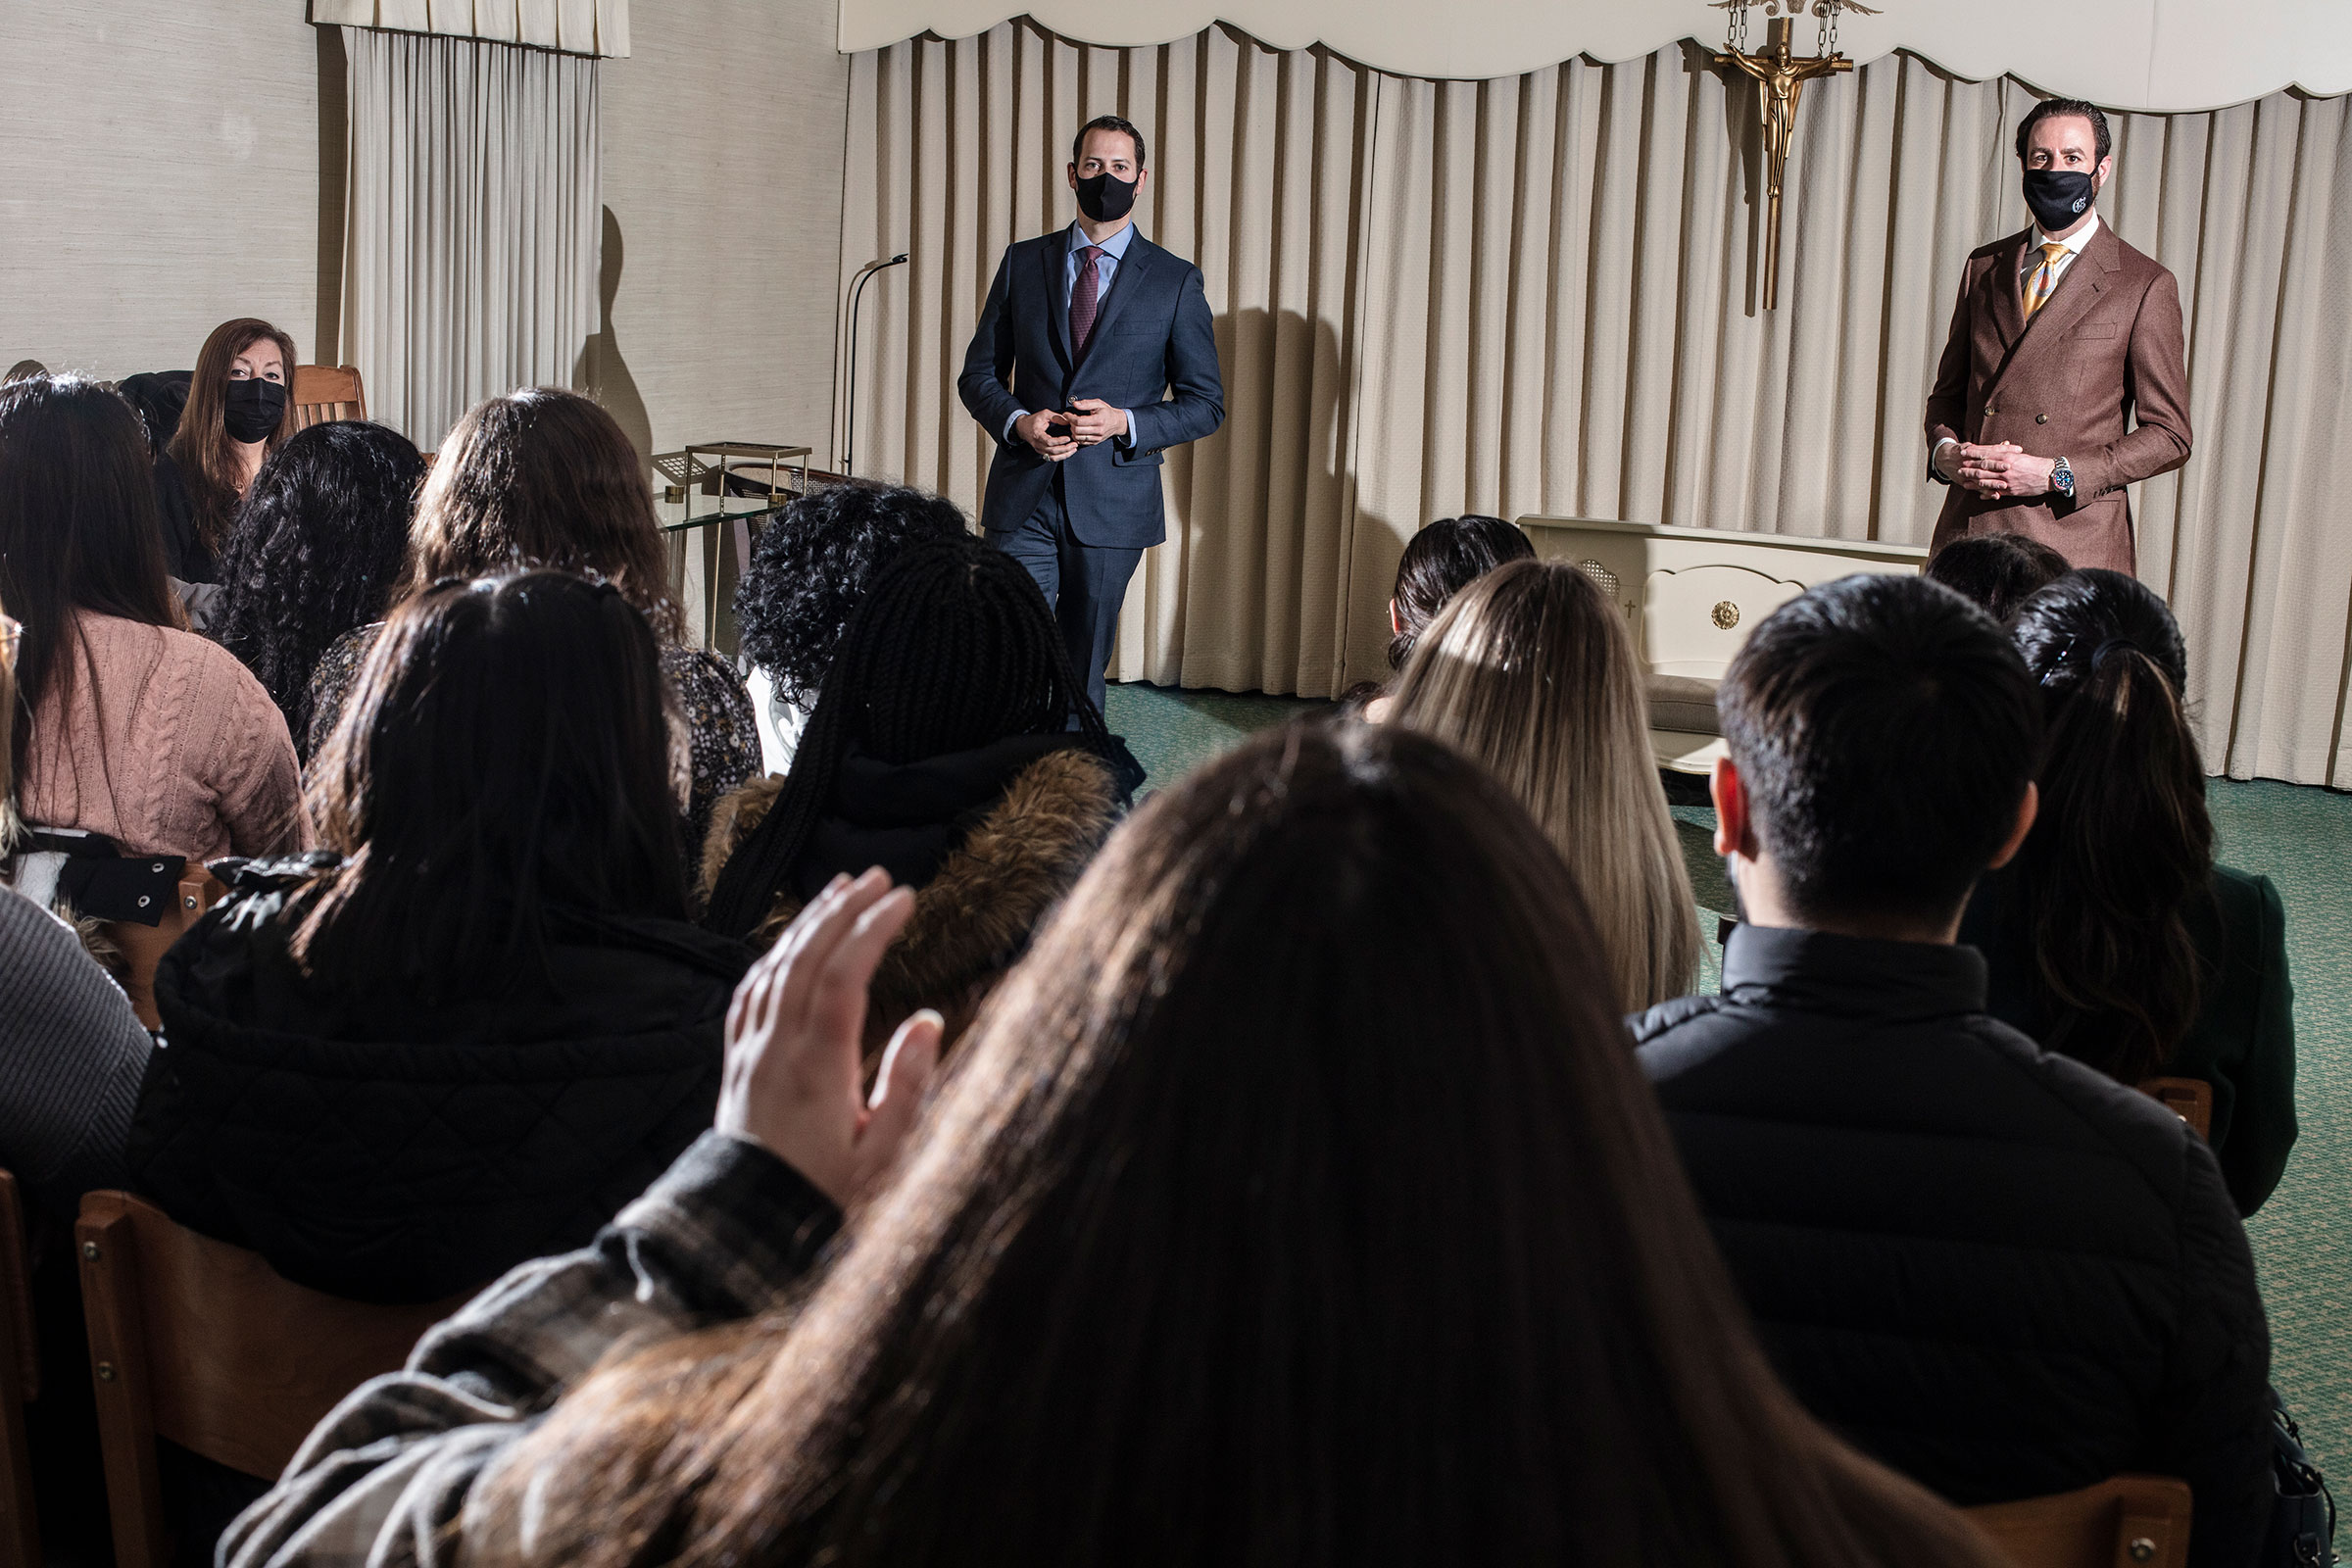 Funeral directors Aaron Tirpack (left) and Frank Galante (right) speak to students during a Kean University course on death at Galante Funeral Home in Union, N.J., on Wednesday, February 2, 2022.CREDIT: Bryan Anselm/Redux for TIME